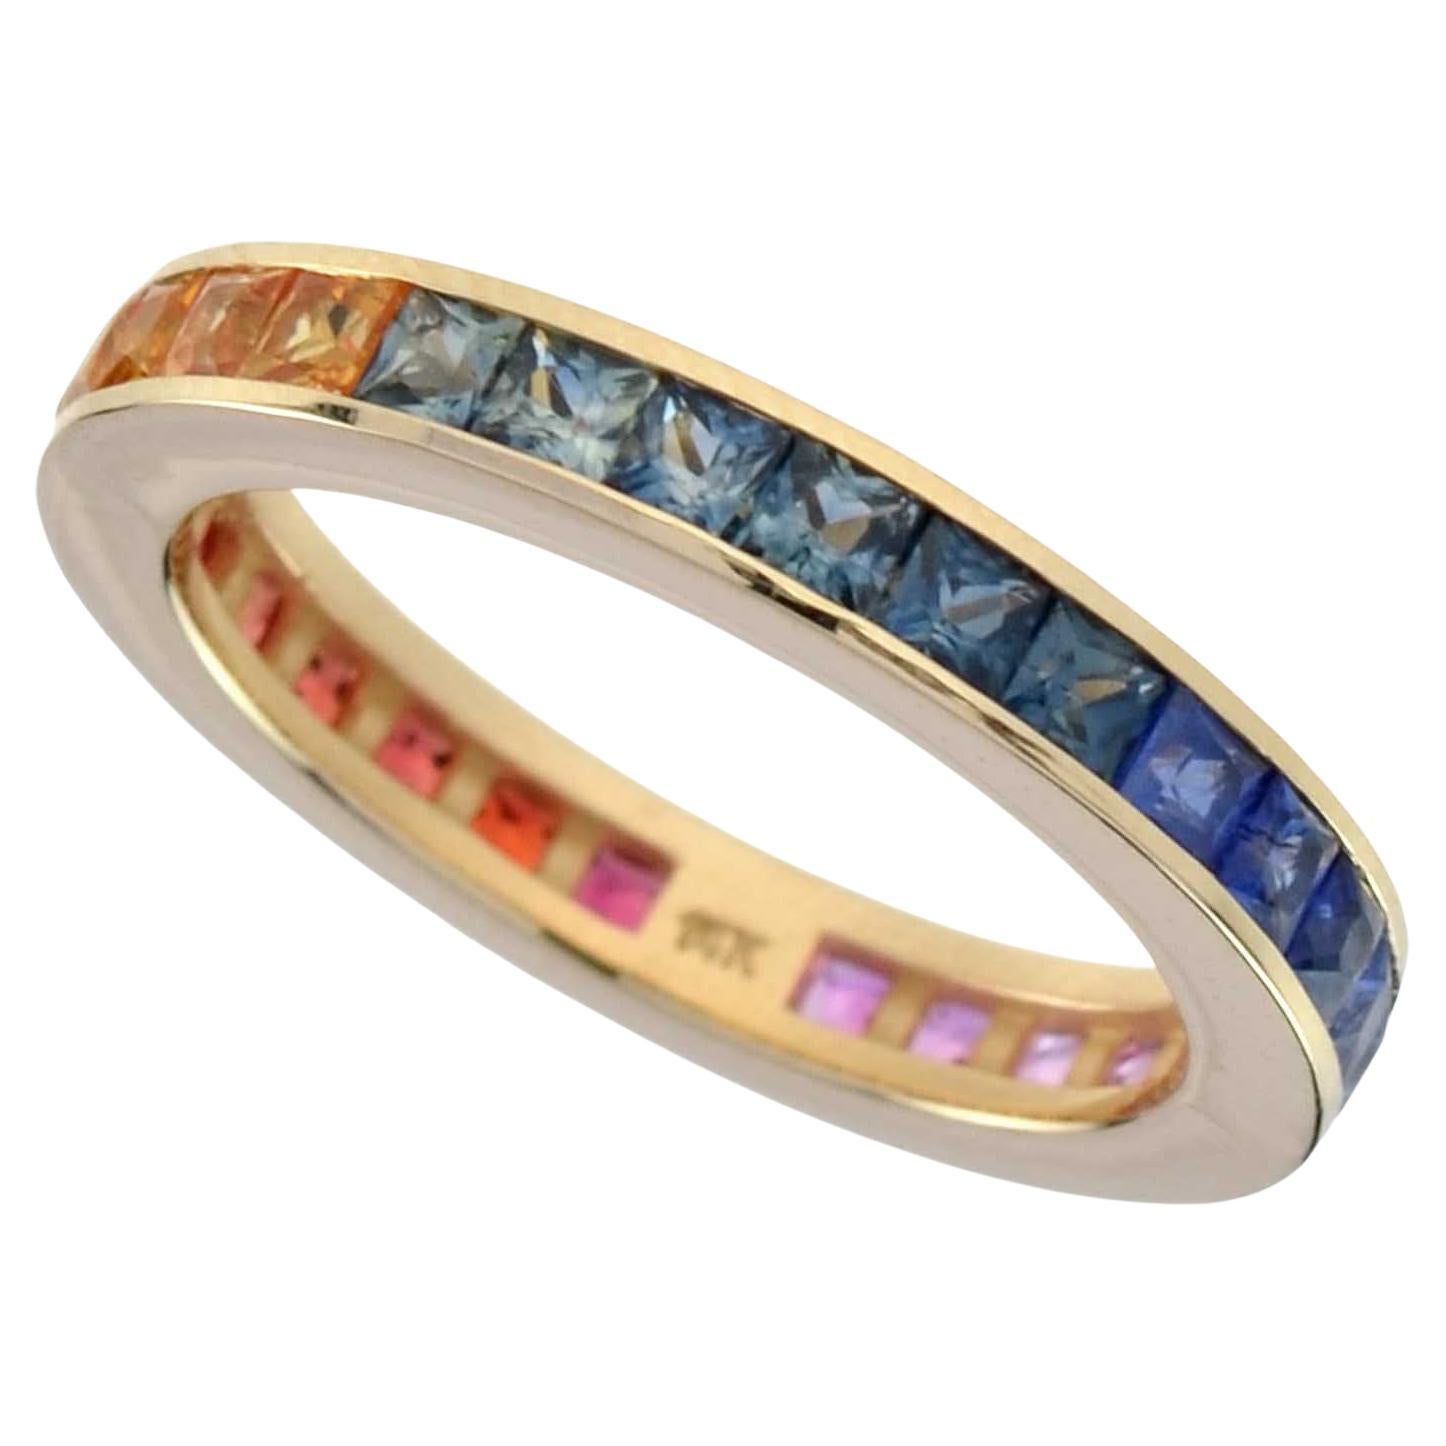 Square Cut Rainbow Sapphire Eternity Band in Yellow Gold 14K